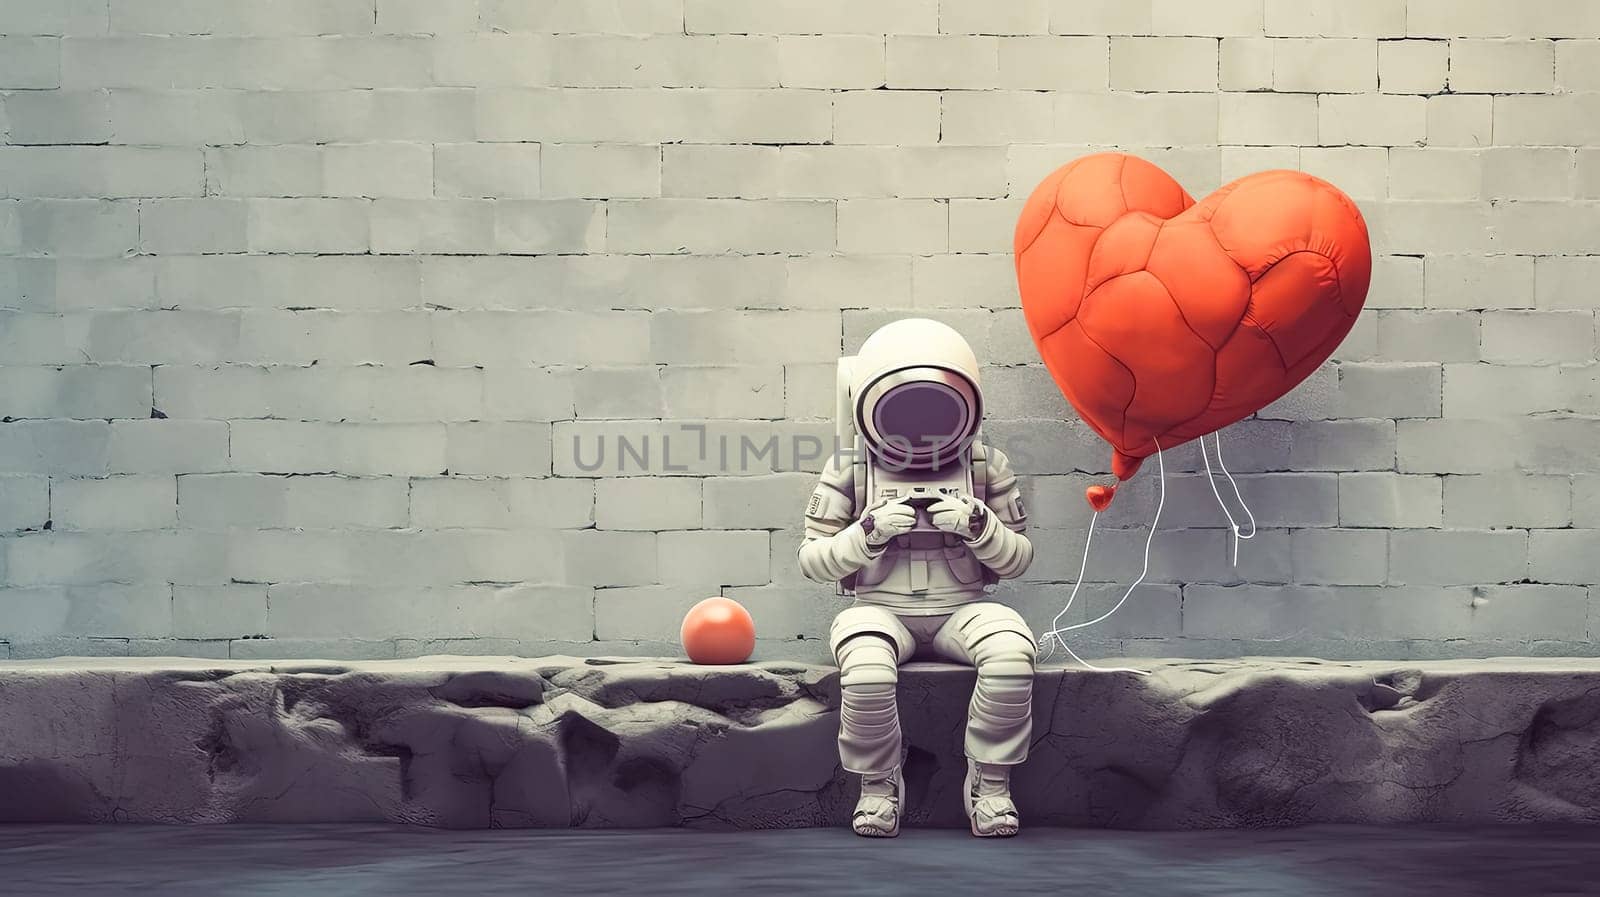 Little astronaut dreams, Child in suit sits with a heart balloon, a cosmic adventure of love and imagination taking flight